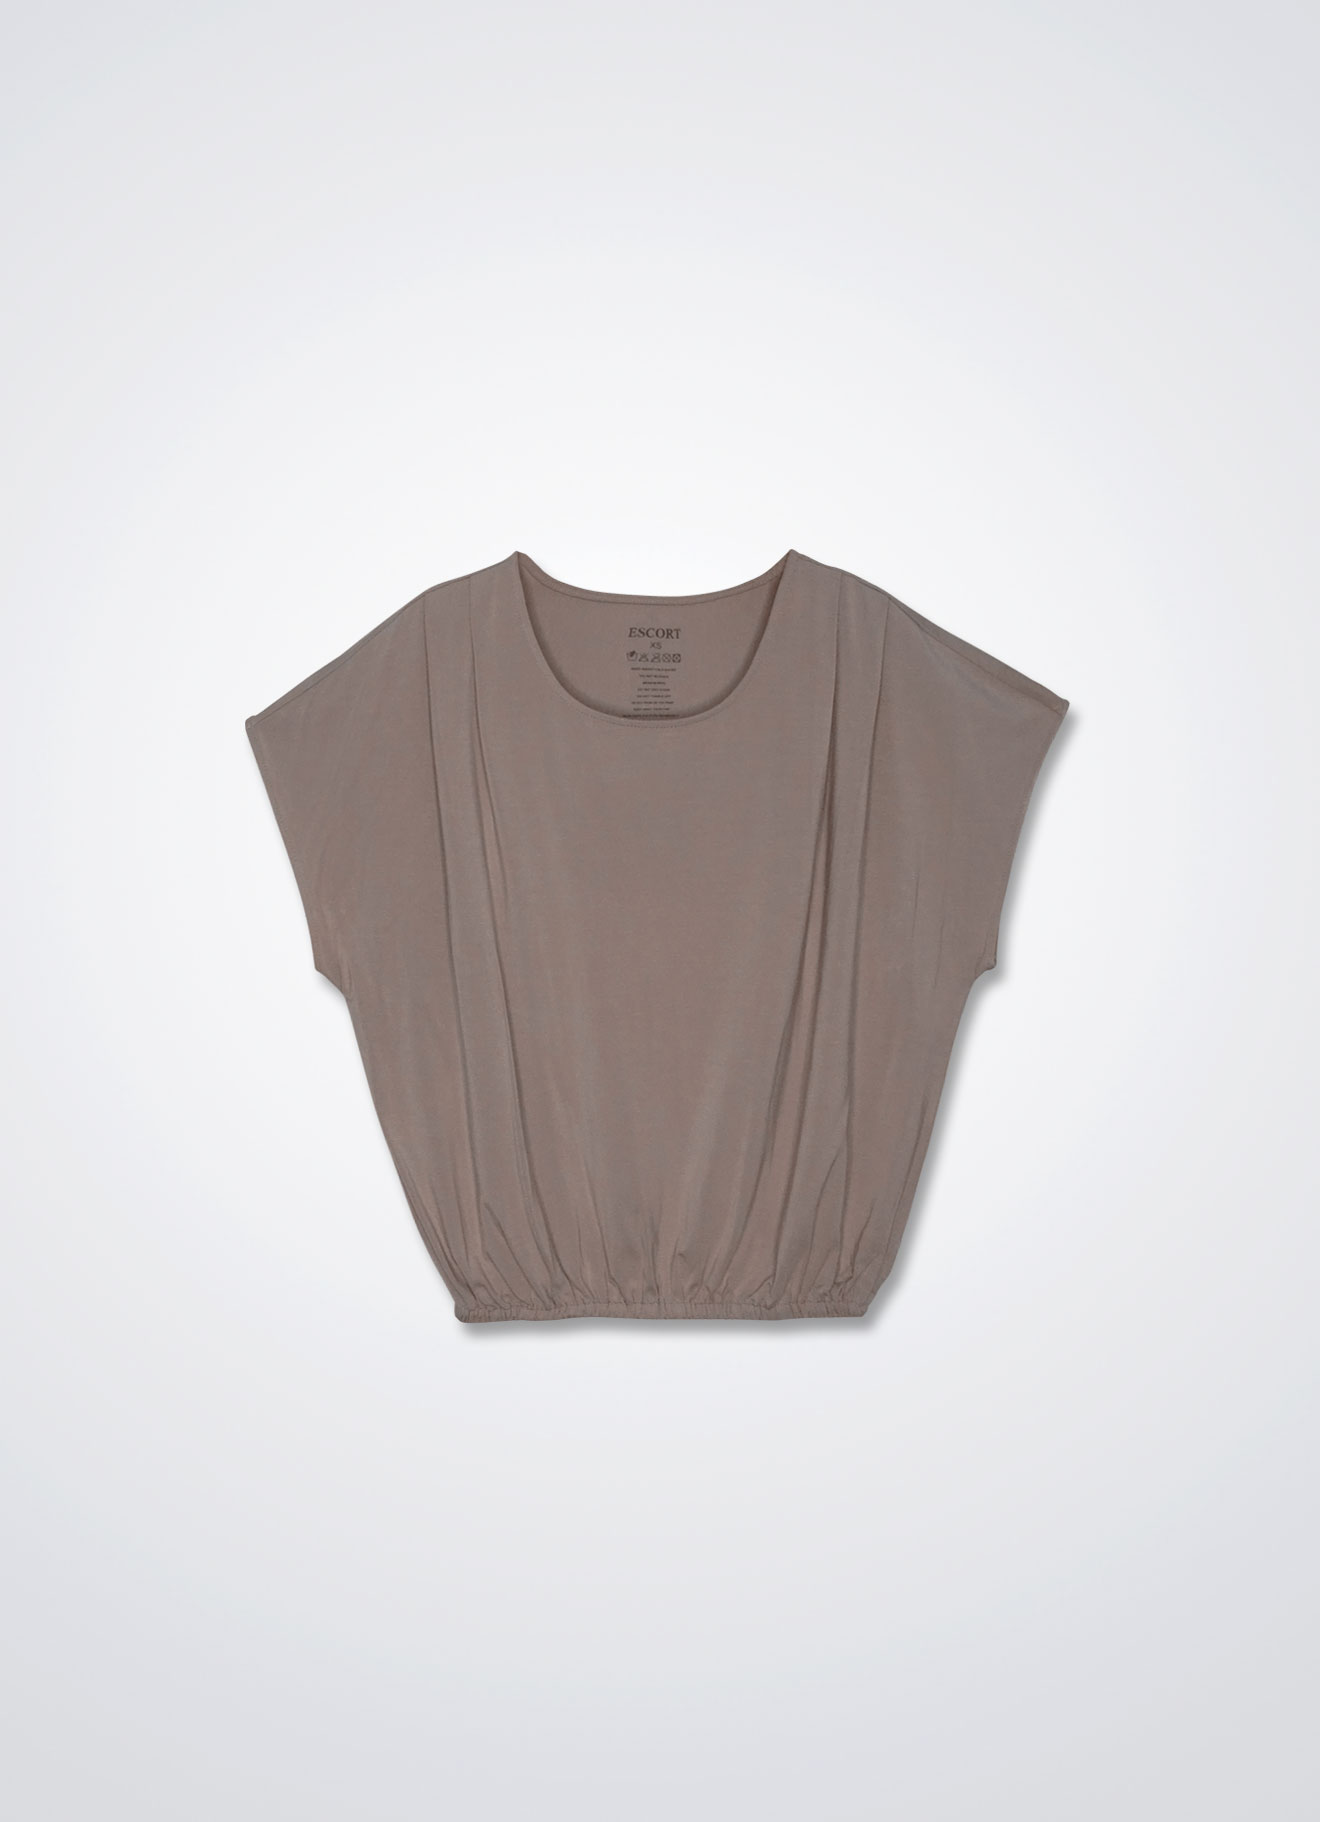 Nomad by Sleeve Top